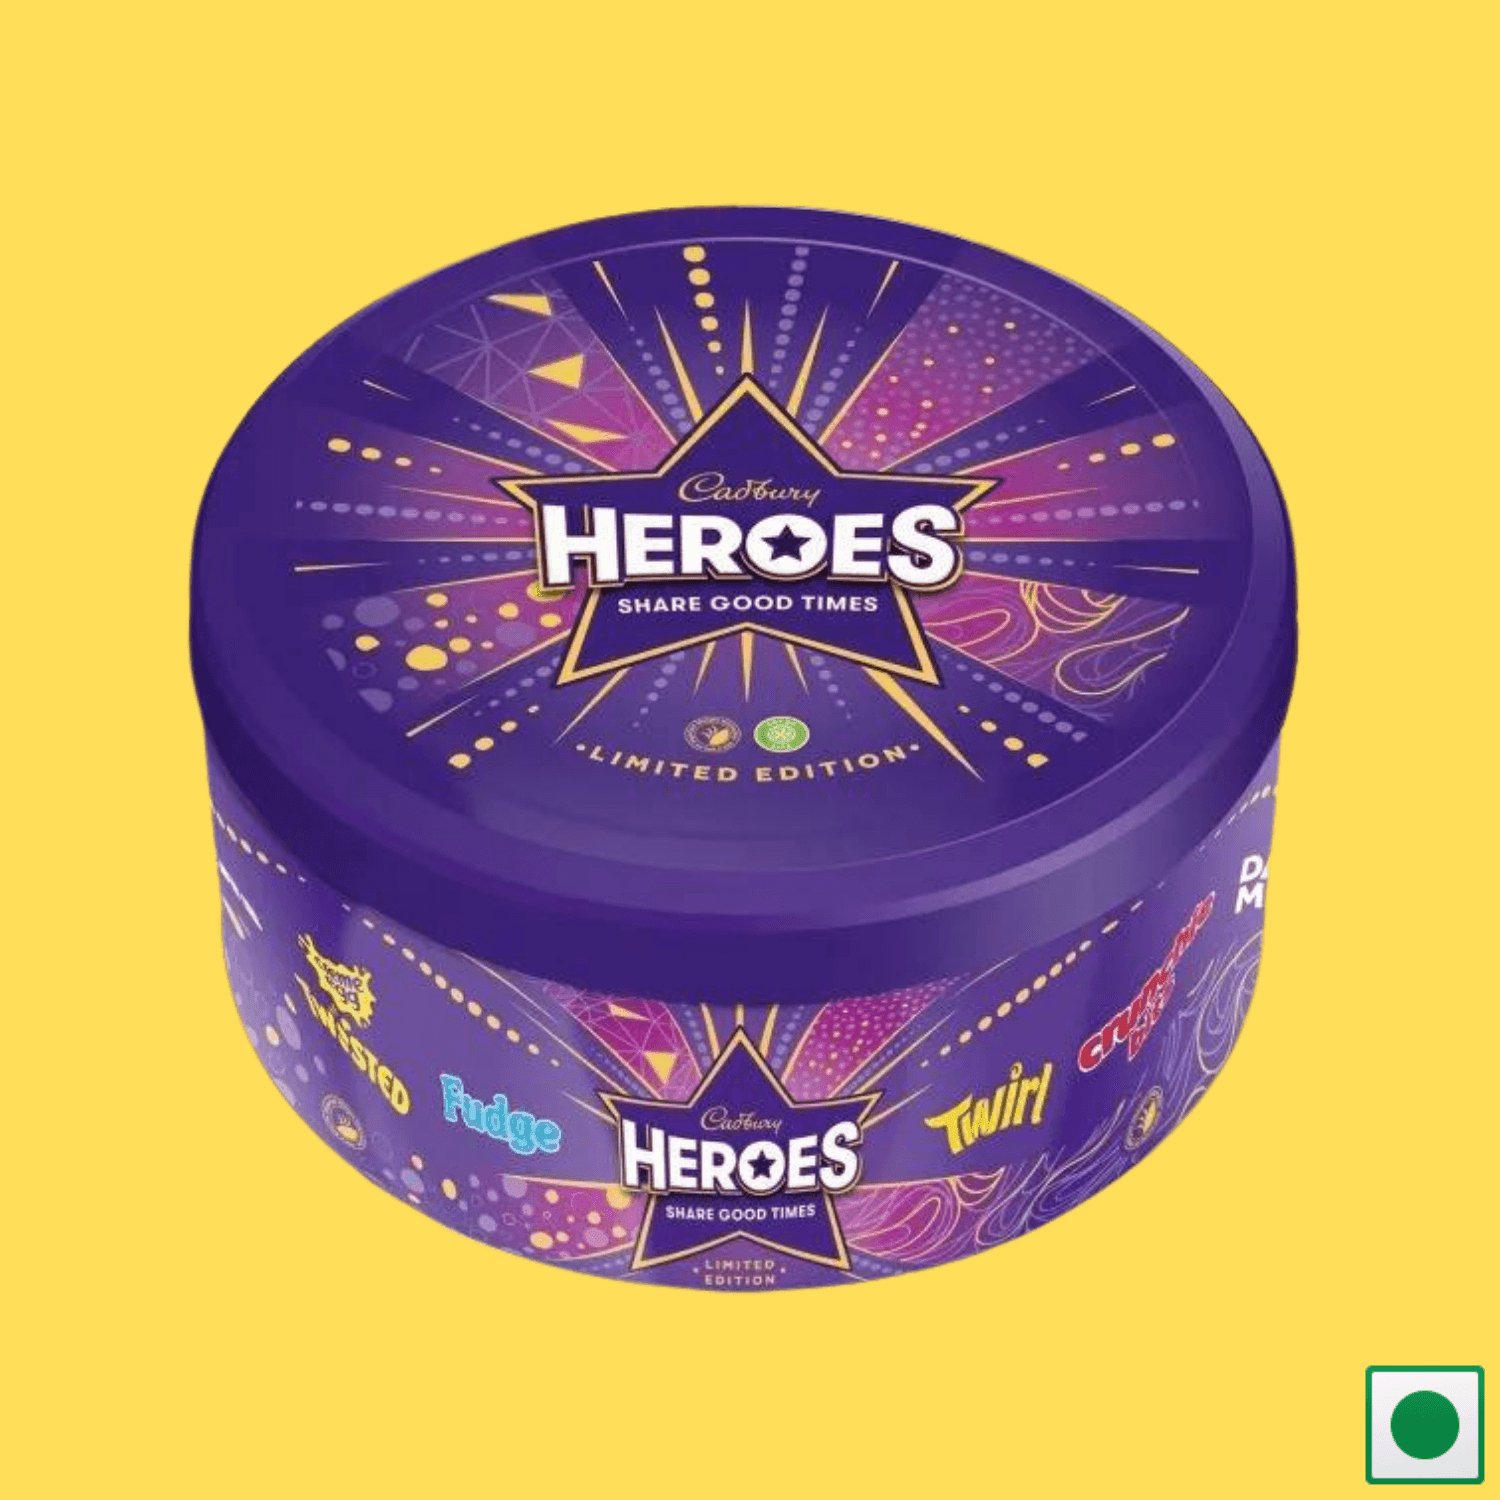 Cadbury Heroes Limited Edition Tin, 800g (Imported) - Super 7 Mart